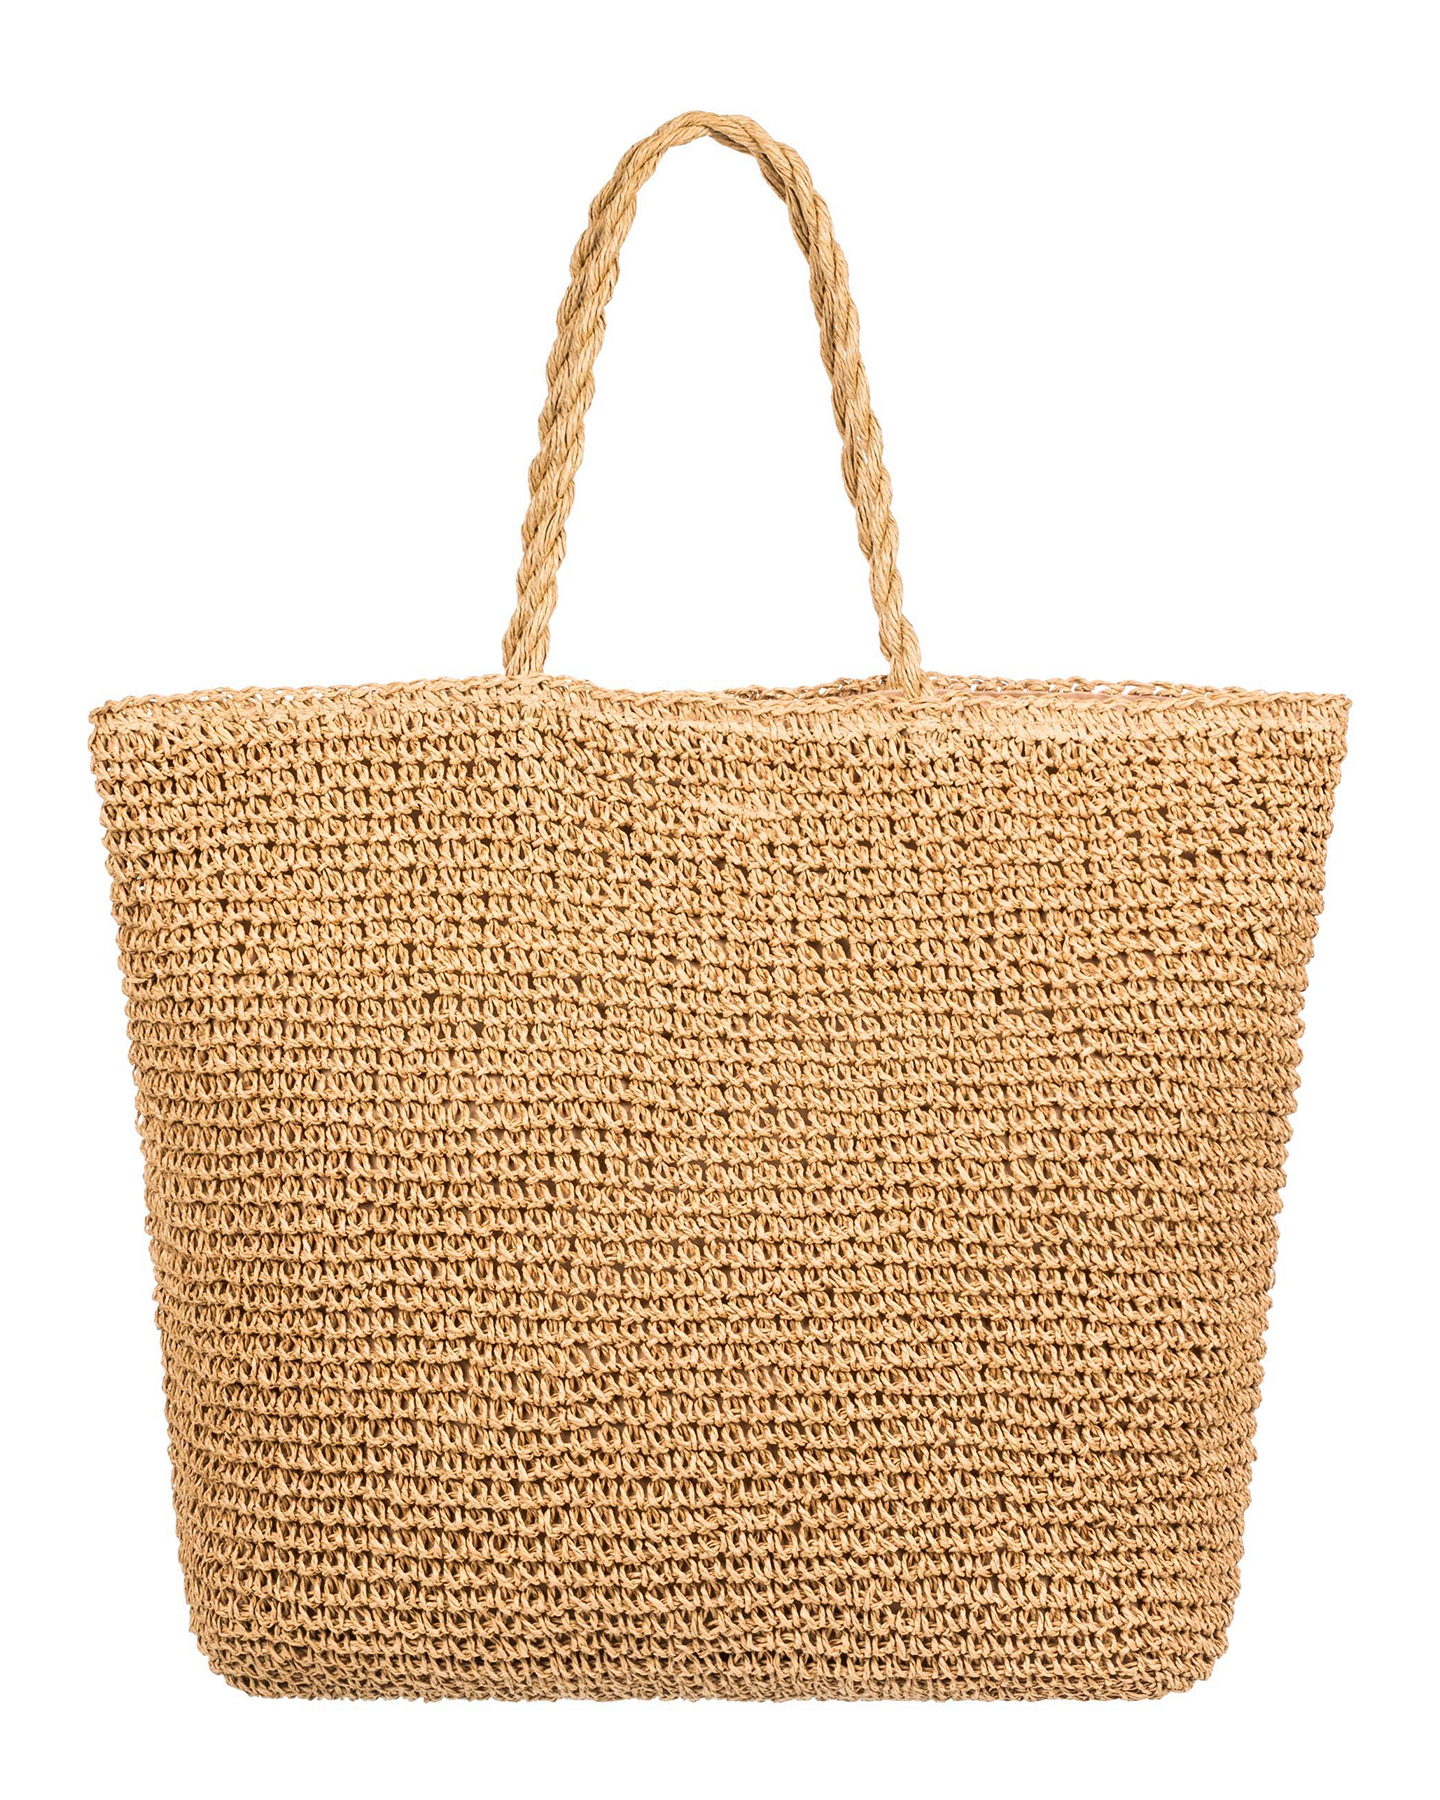 Roxy Positive Energy 24L Large Straw Tote Bag - Natural | SurfStitch